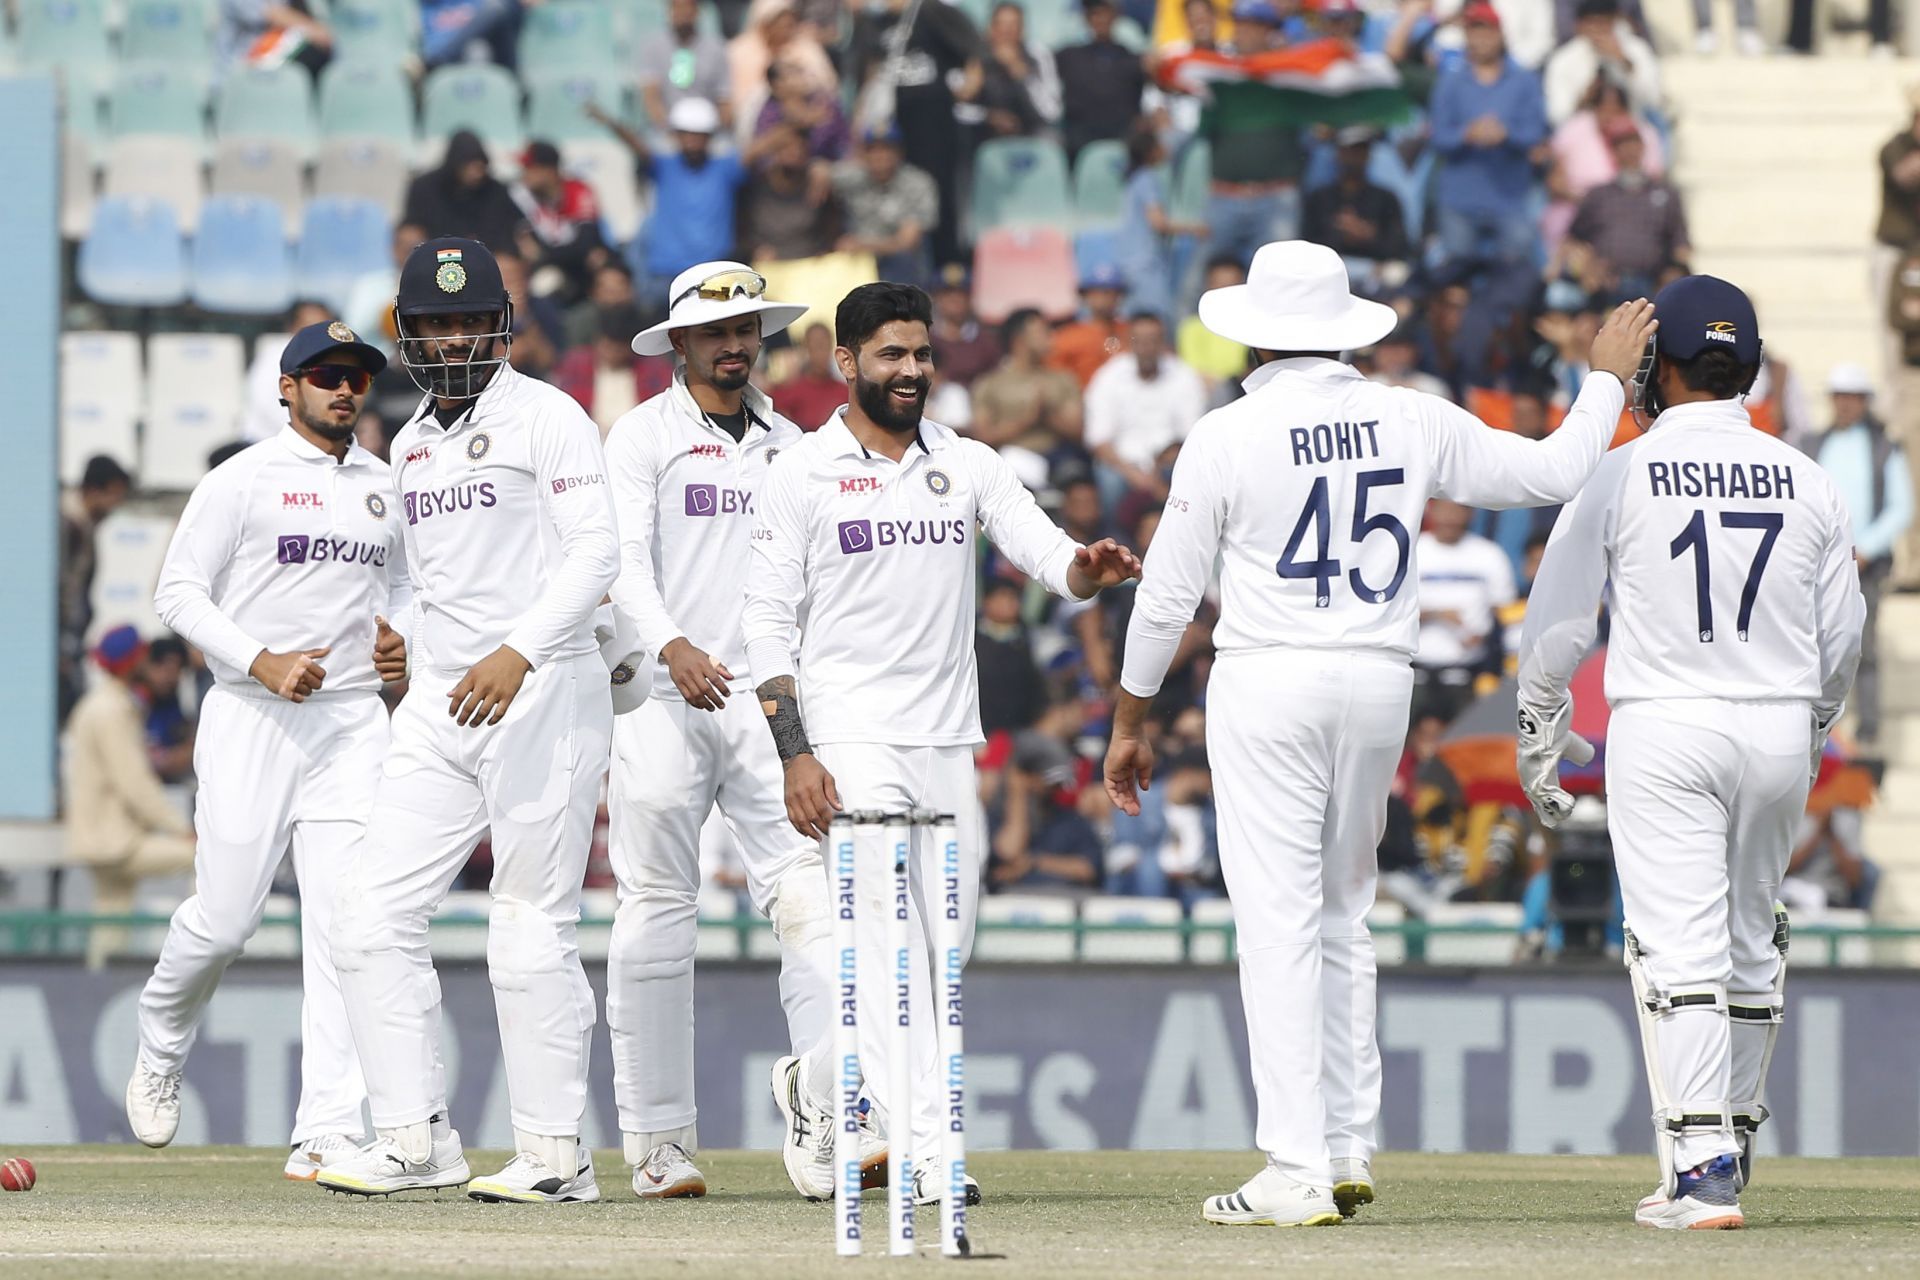 India smashed Sri Lanka by an innings and 222 runs